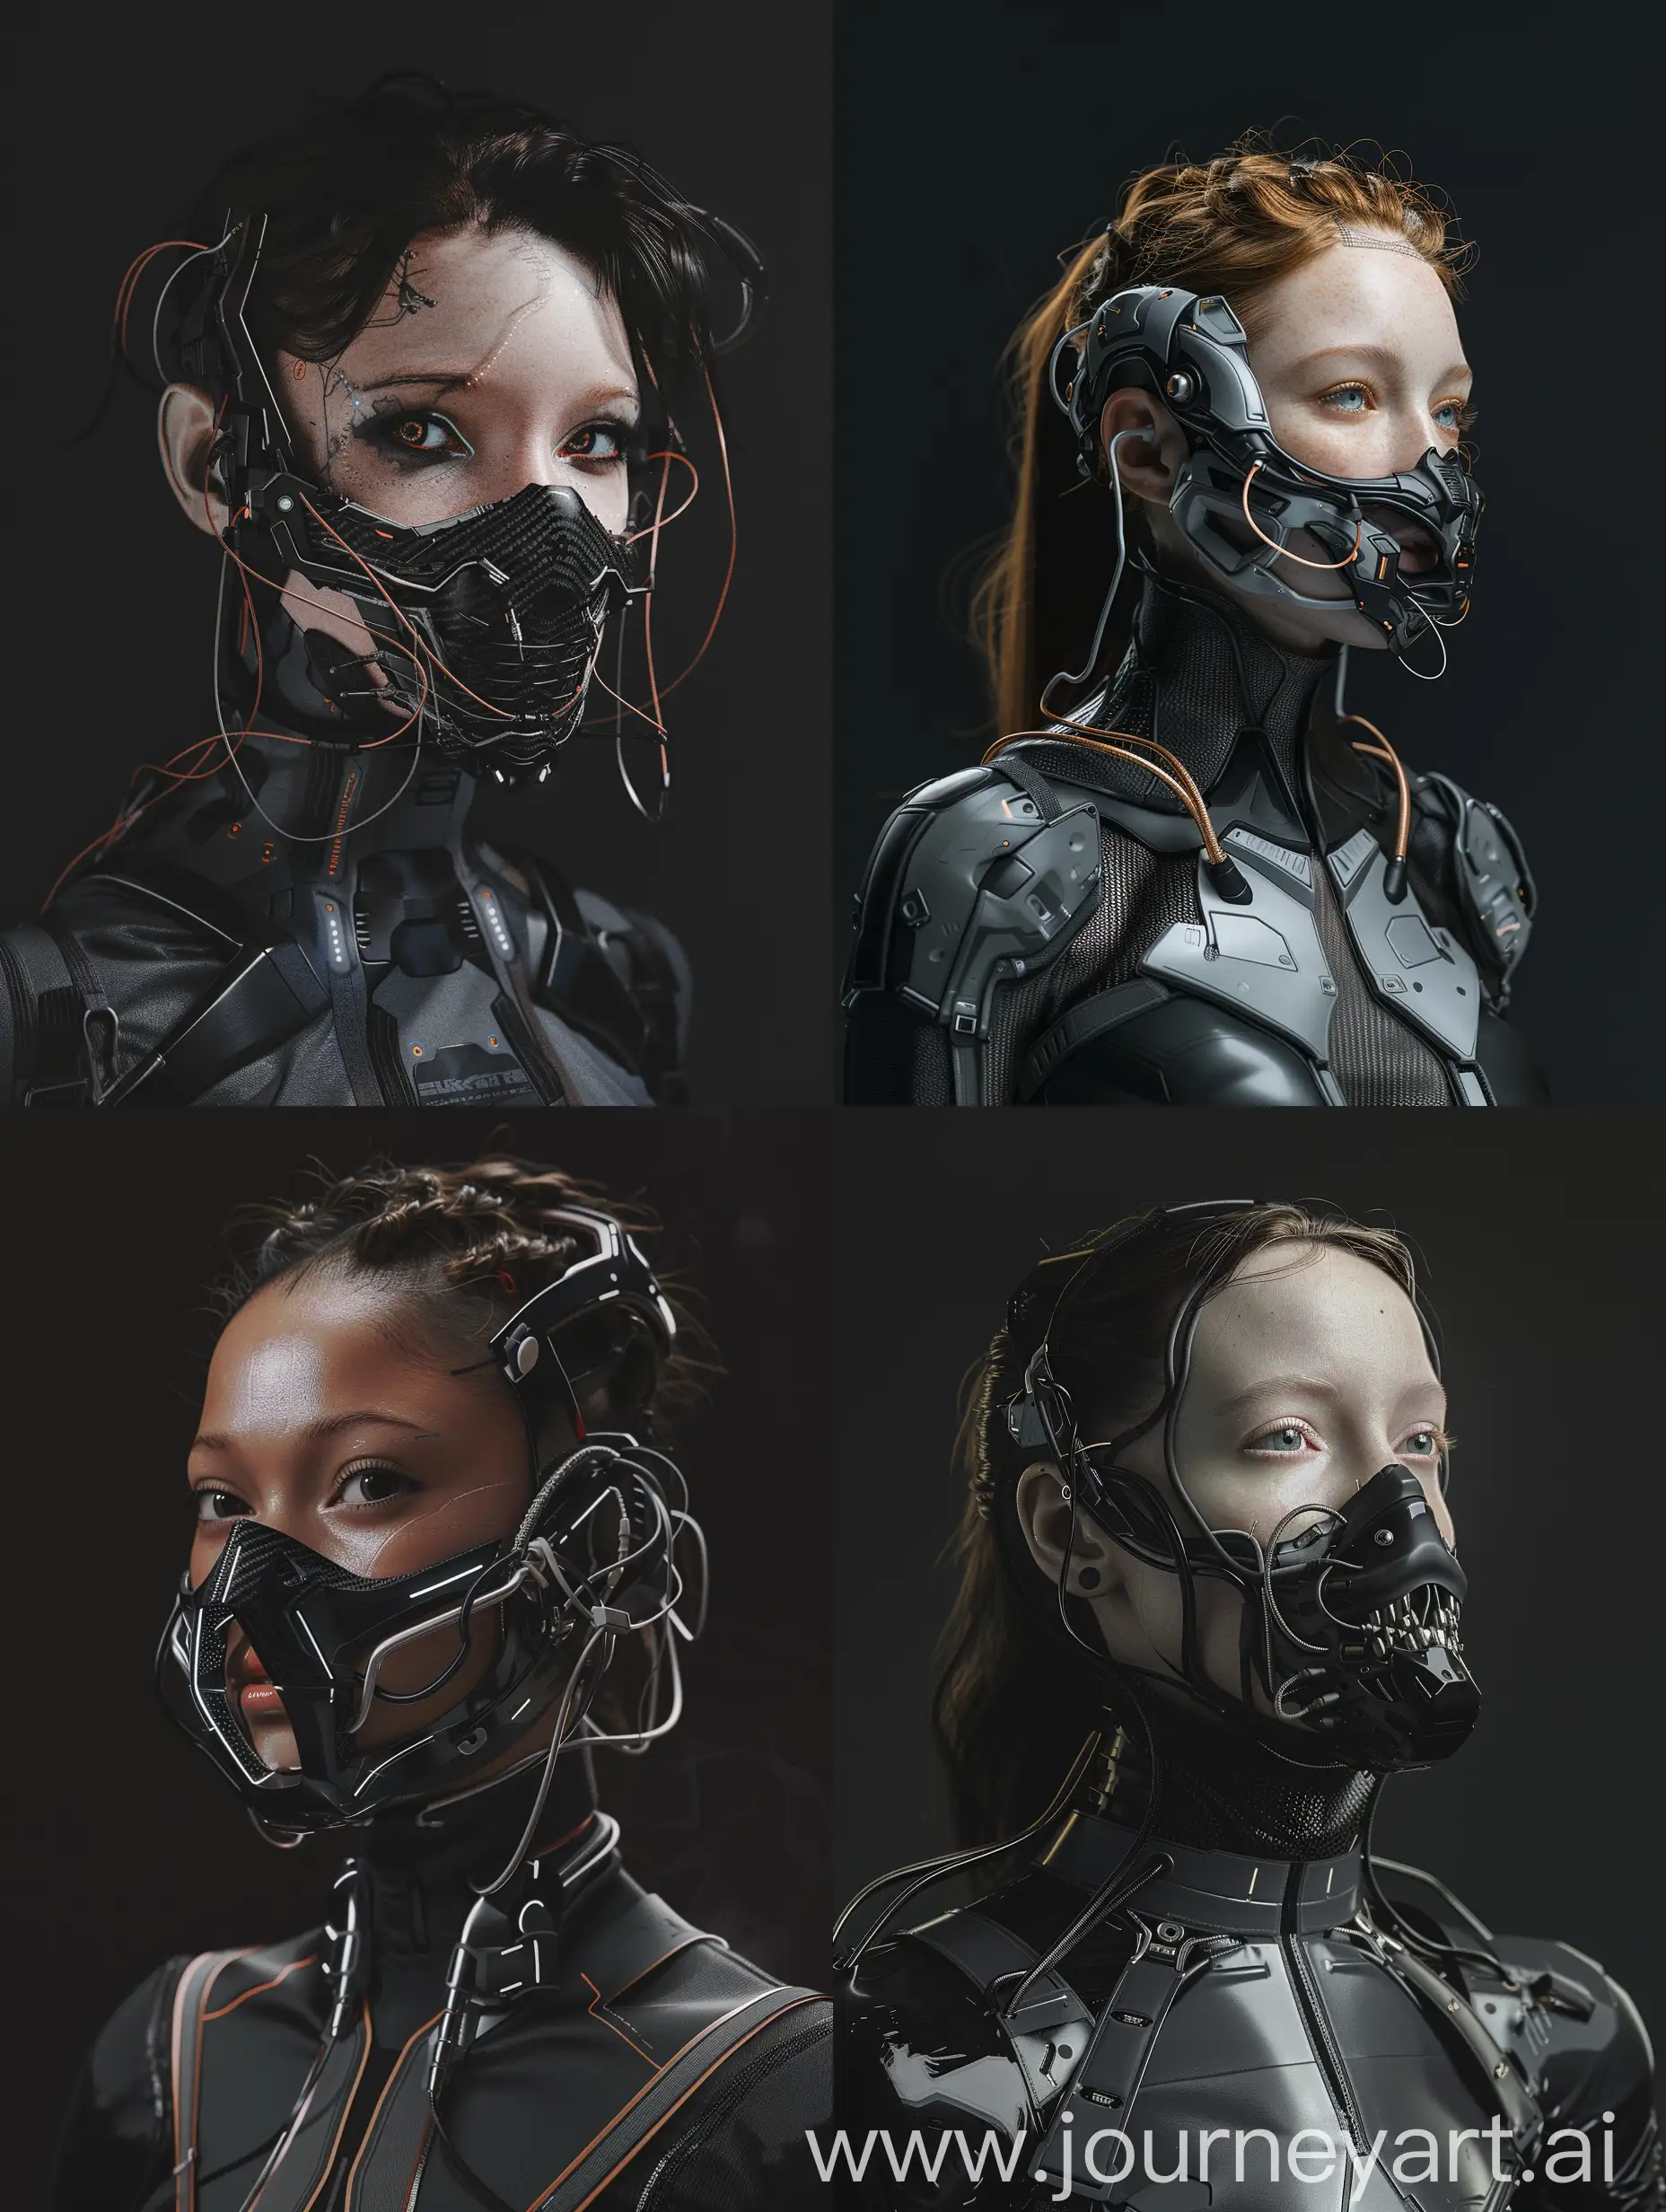 Against a sleek black backdrop, witness the captivating presence of a Beautiful characther adorned with a cybernetic mouth-covering mask. It seamlessly merges cutting-edge technology with intricate details, showcasing carbon fiber textures, sleek aluminum accents, and pulsating wires. Symbolizing the delicate equilibrium between humanity and machine, her appearance embodies the essence of a futuristic cyberpunk aesthetic, further accentuated by Oakley -inspired add-ons. With dynamic movements reminiscent of action-packed film sequences, accompanied by cinematic haze and an electric energy, she exudes an irresistible allure that commands attention. BRIGHTNESS AND CONTRAST, levels, shadow,

